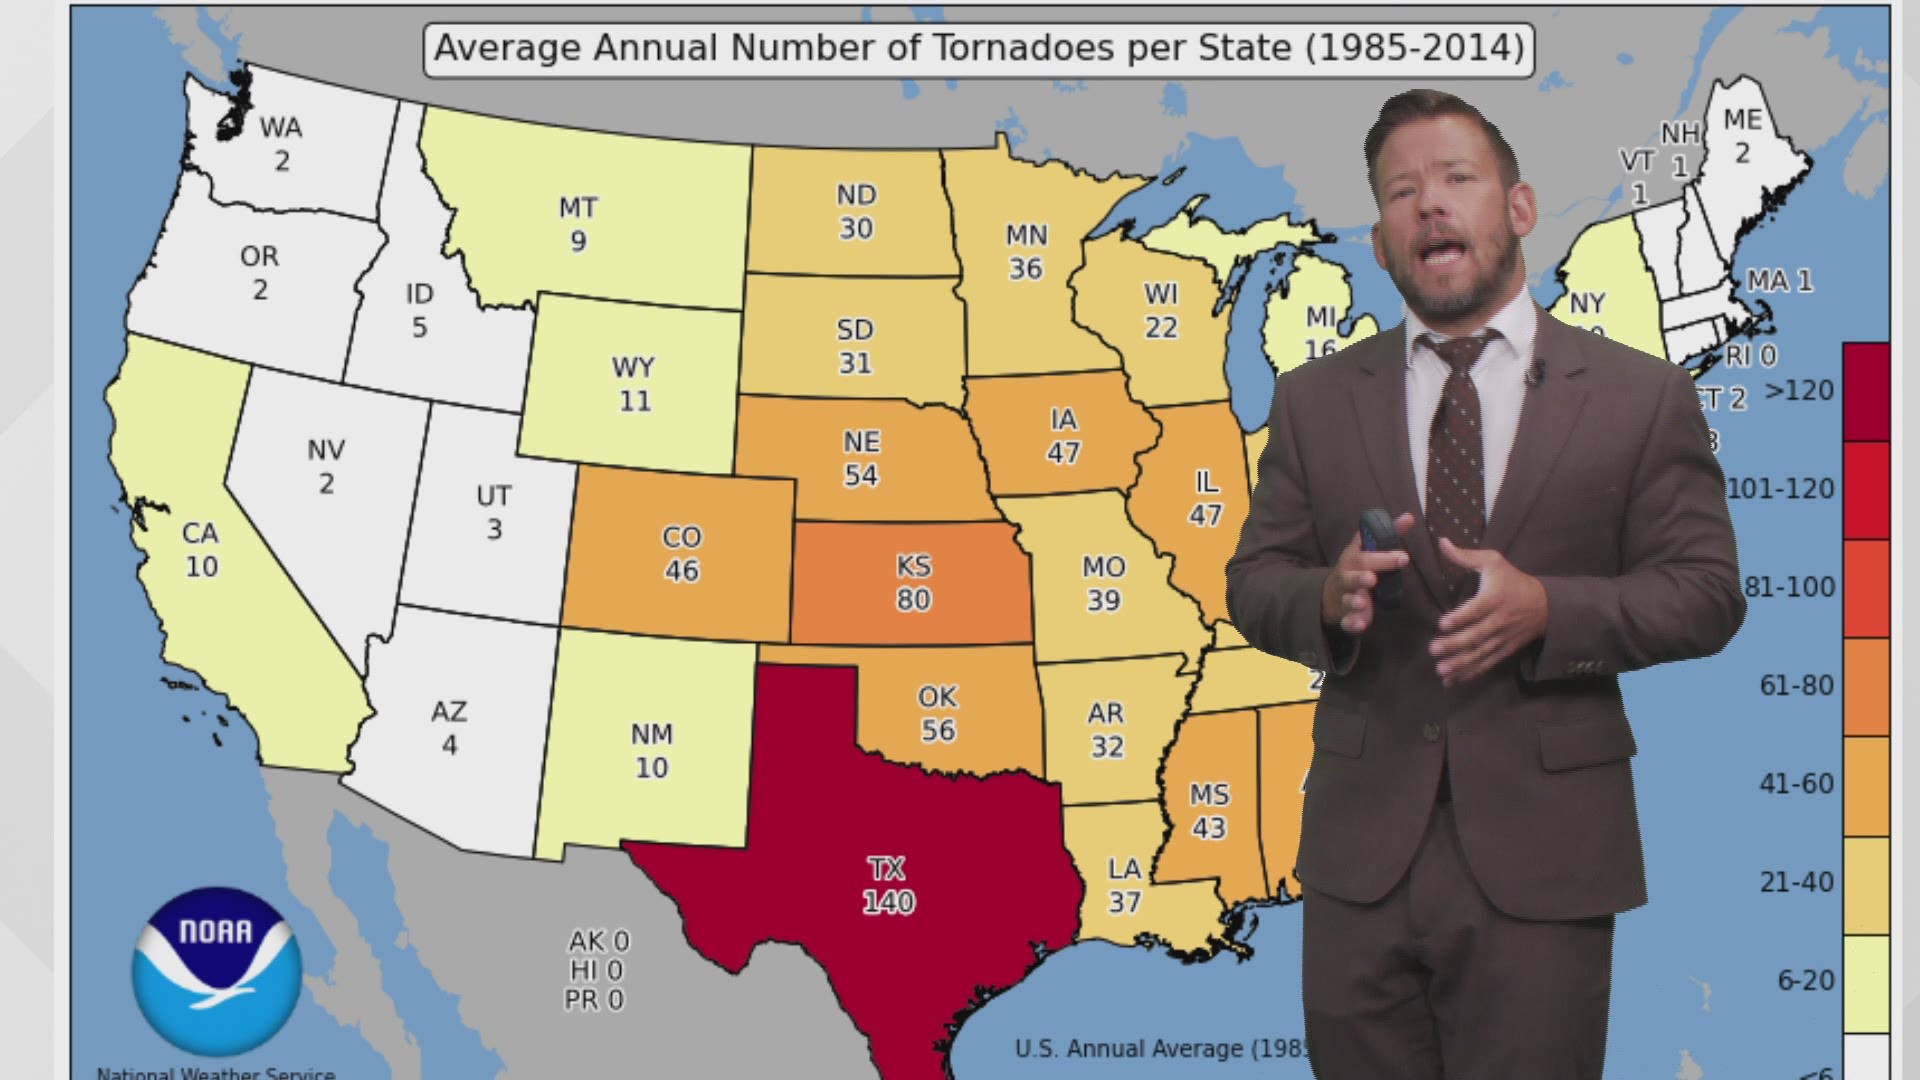 Minnesota sees 36 tornadoes during our average severe weather season (1985-2014 avg). KARE 11 meteorologist Sven Sundgaard takes a look at how we're stacking up so far in 2019.